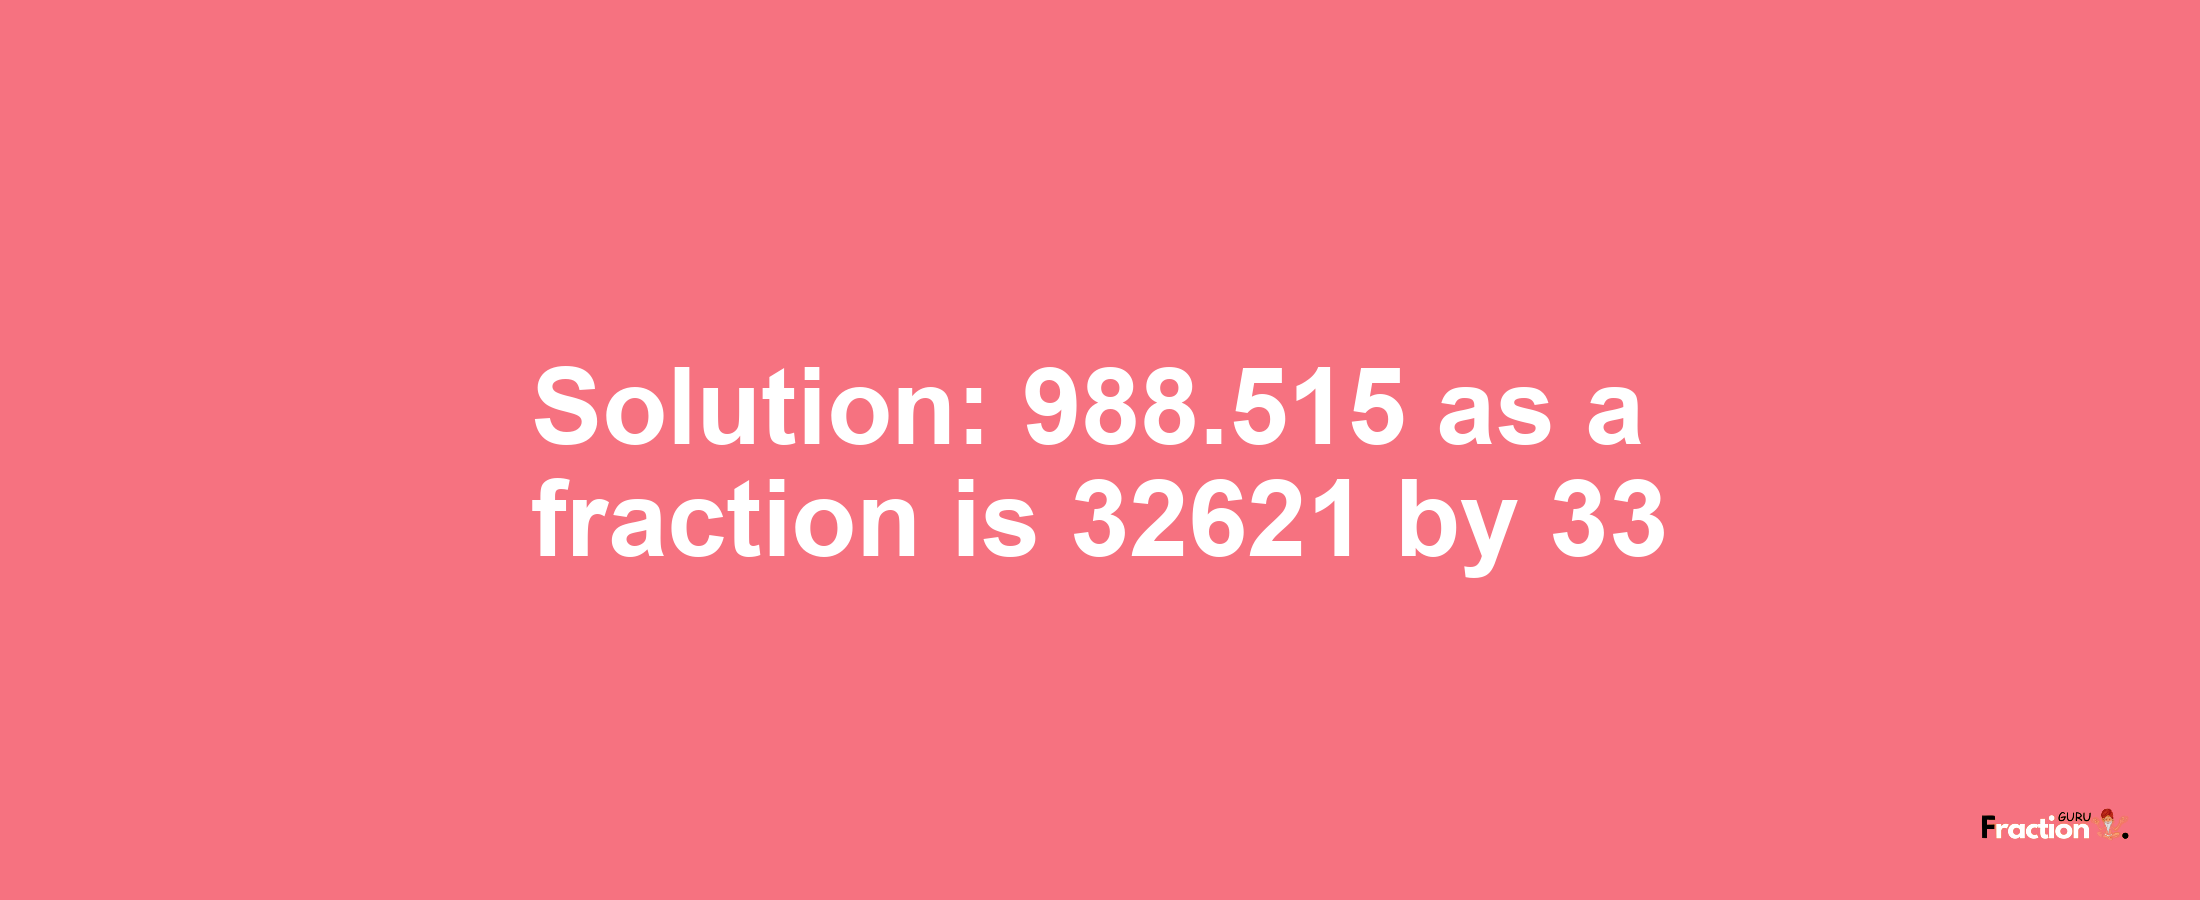 Solution:988.515 as a fraction is 32621/33